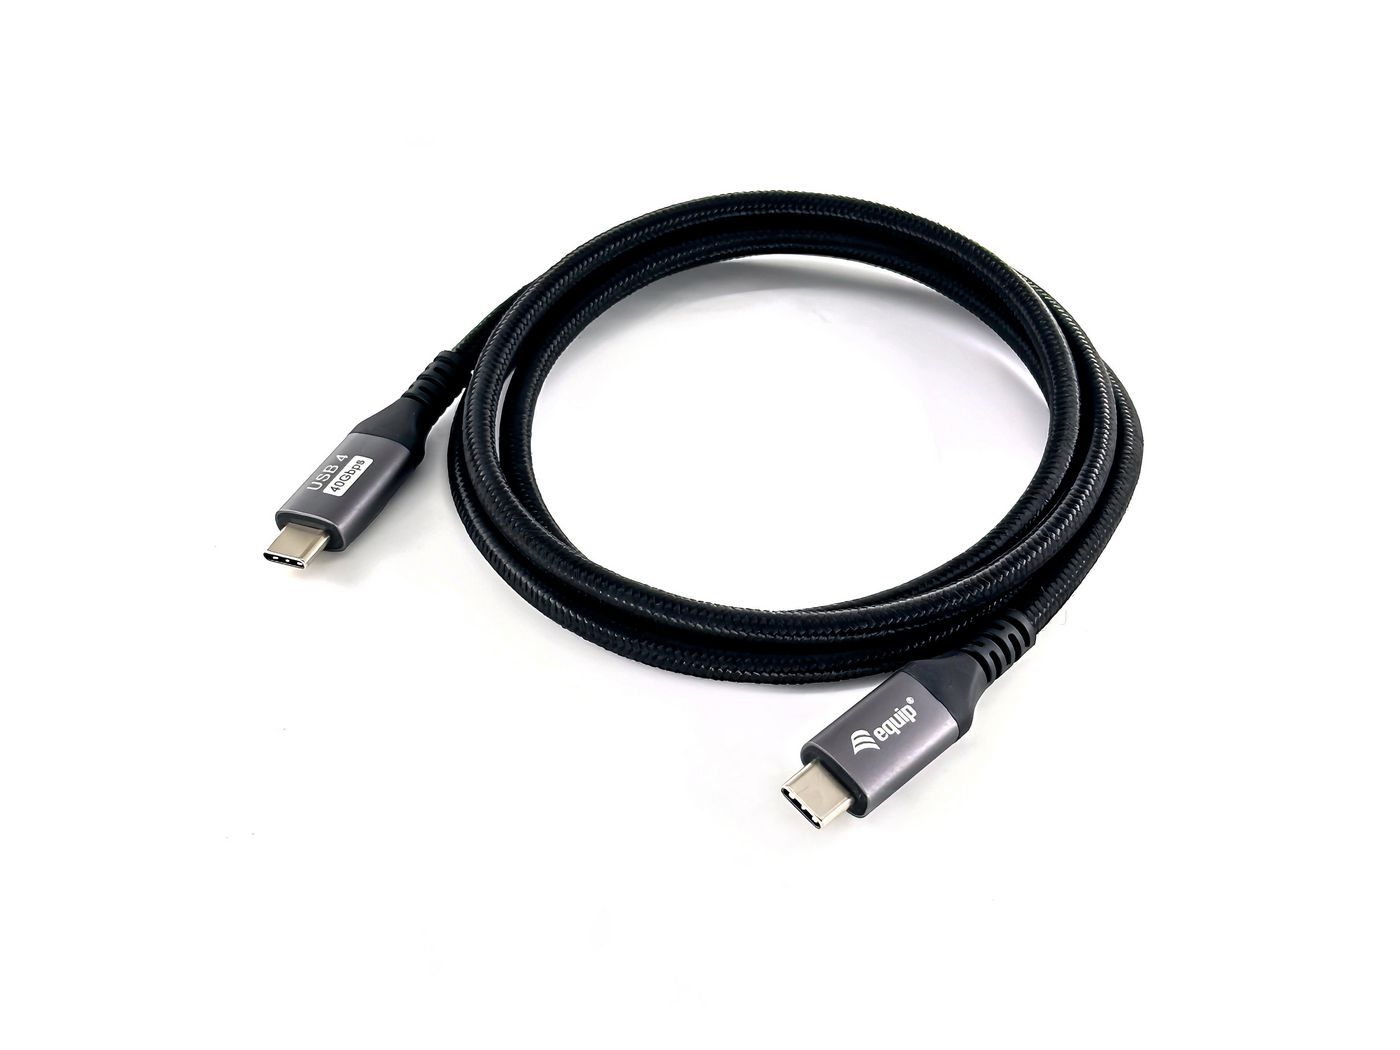 Equip 128381 W128829047 Usb 4 Gen 3 C To C Cable, 